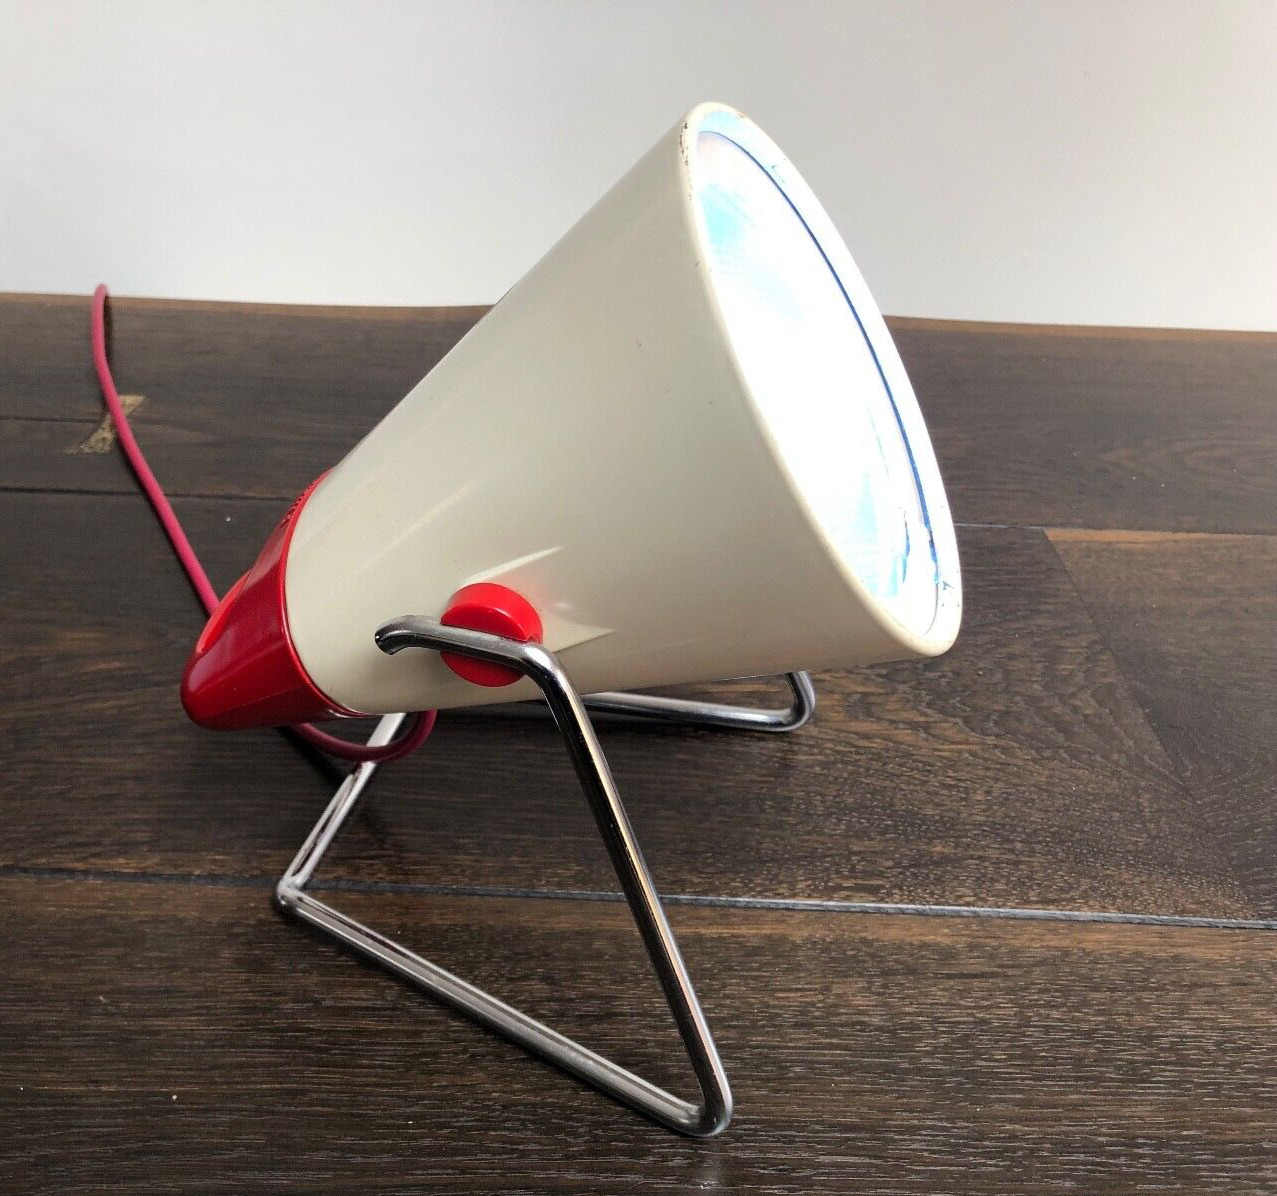 Rare Vintage Converted Philips Infraphil Heat Lamp - Now A Desk or Table Lamp